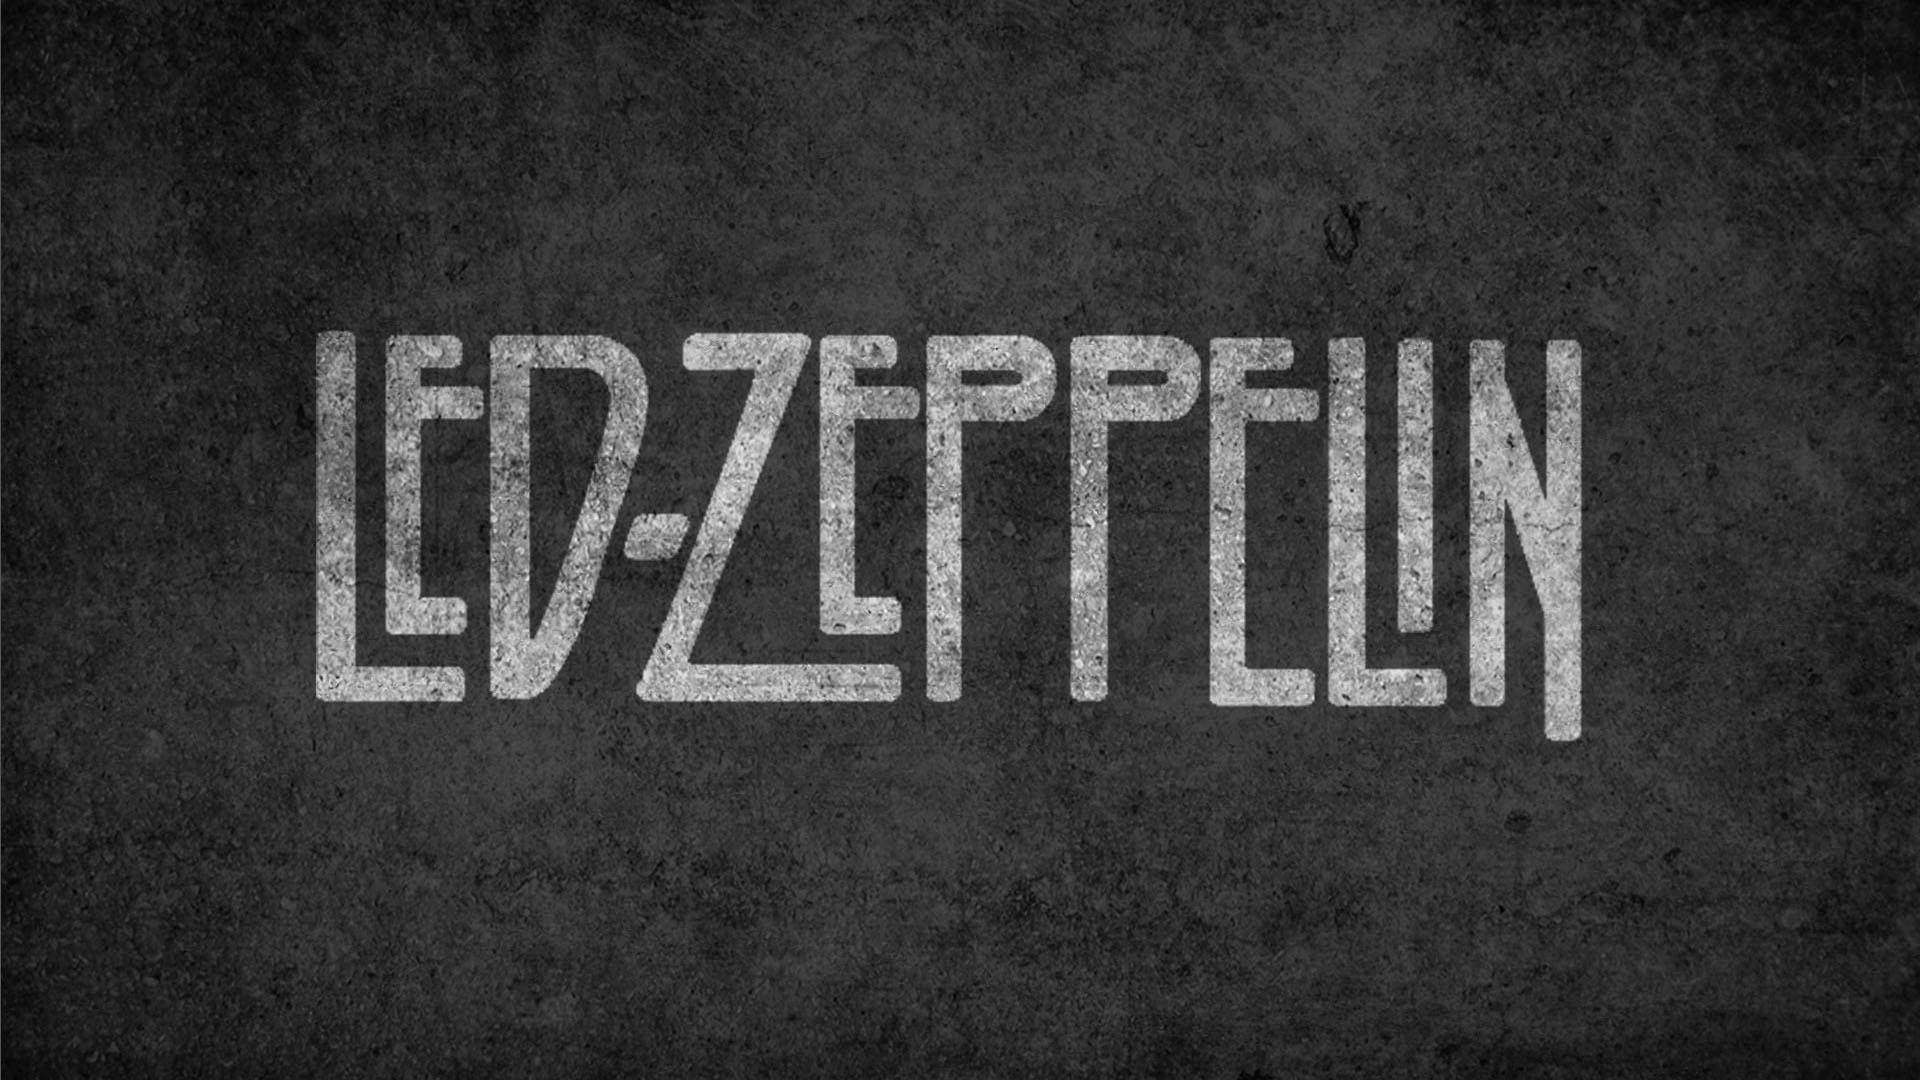 Led zeppelin backgrounds pictures